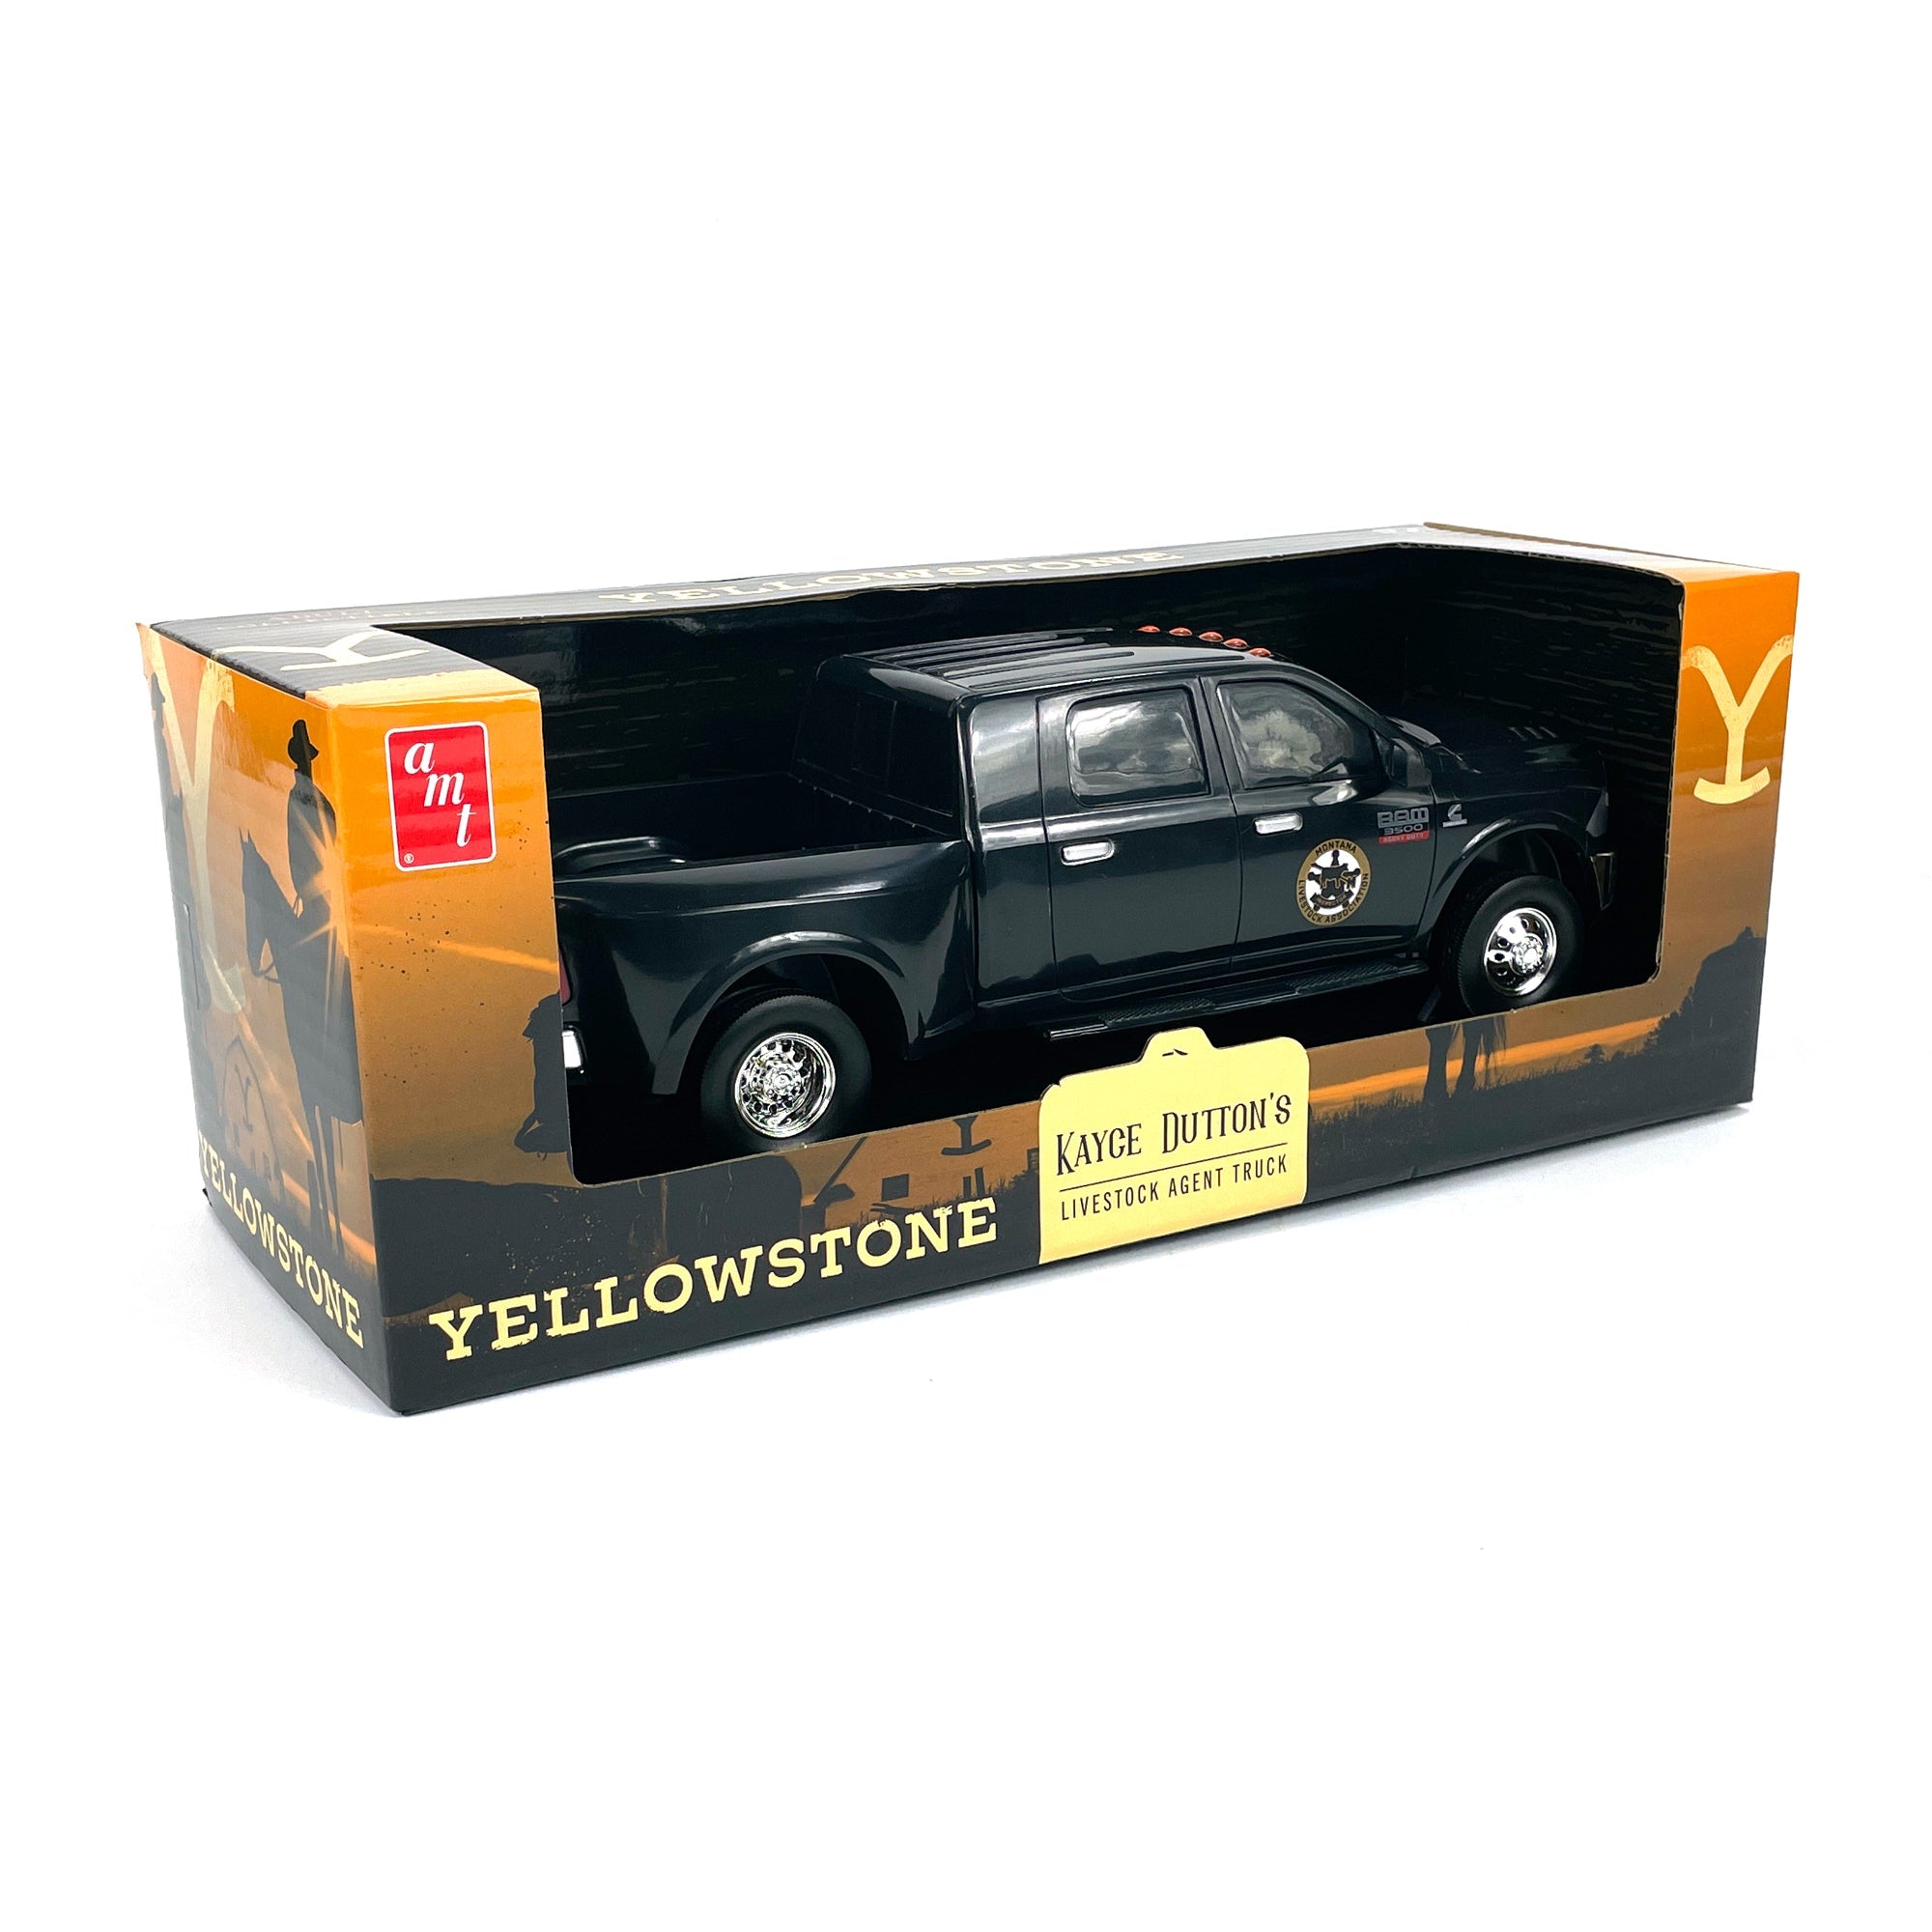 yellowstone adult collectible kayce dutton' - 2